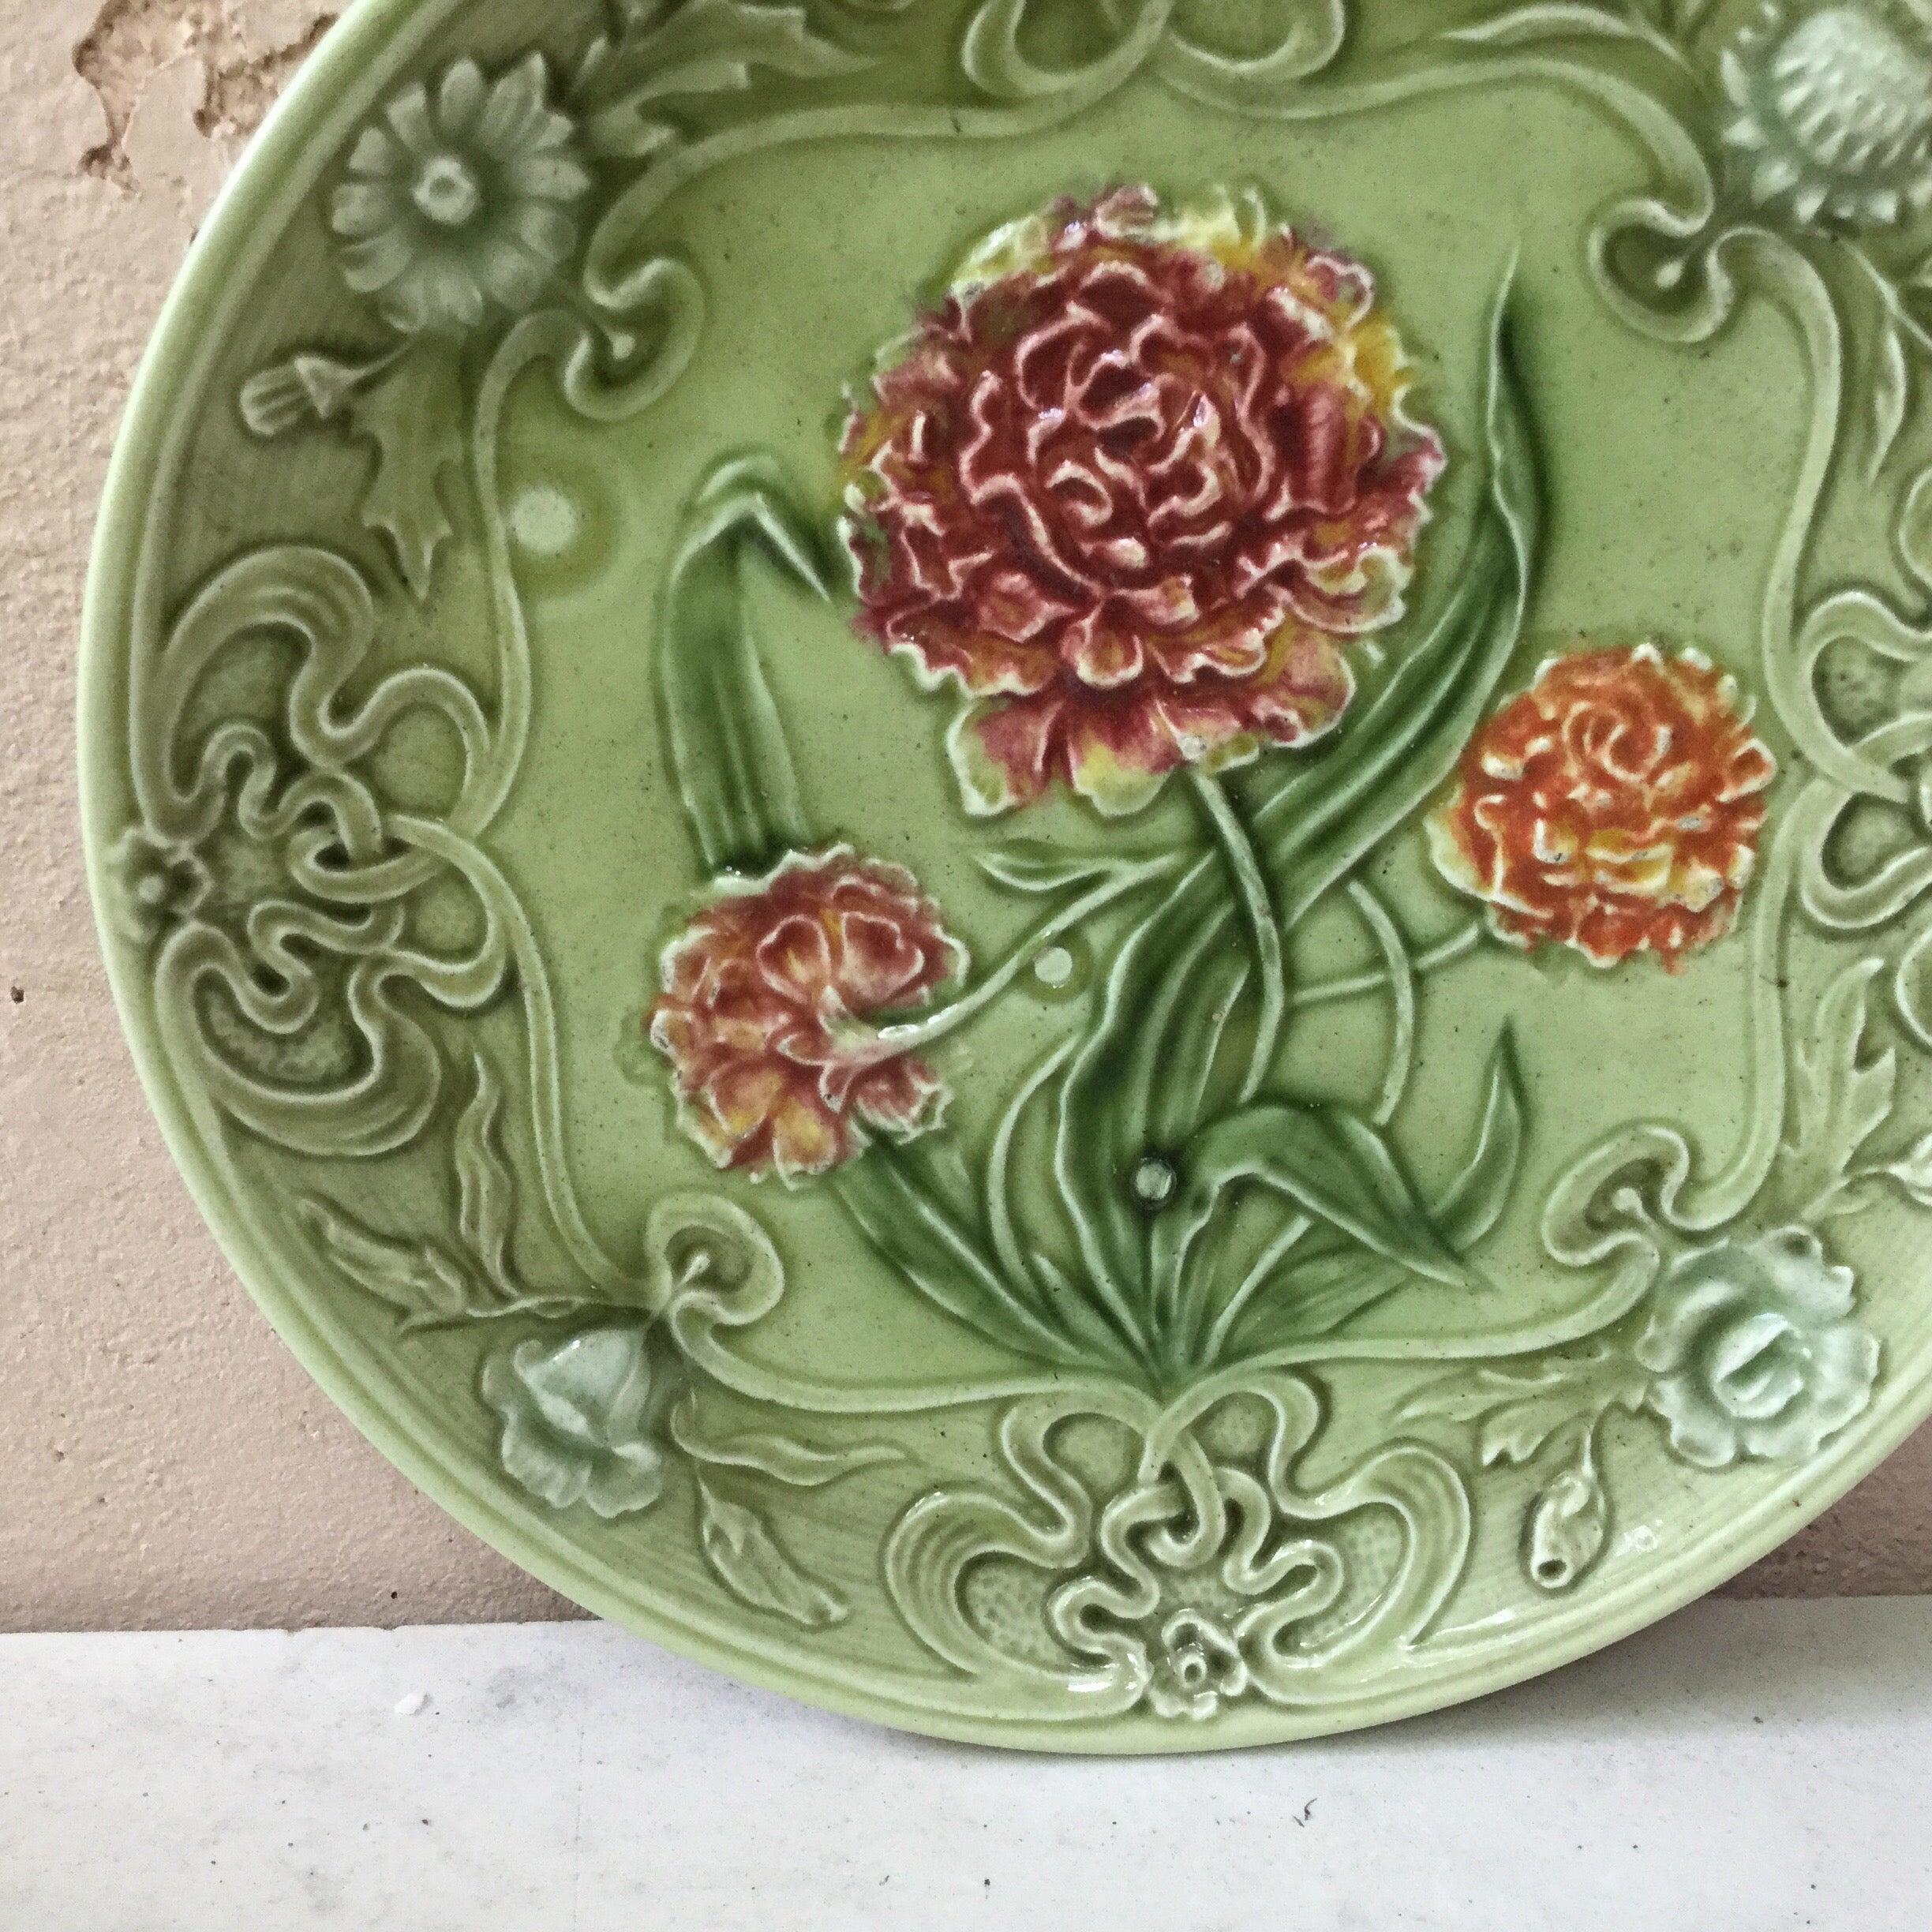 German Majolica flowers plate, circa 1900, Art Nouveau period and style.